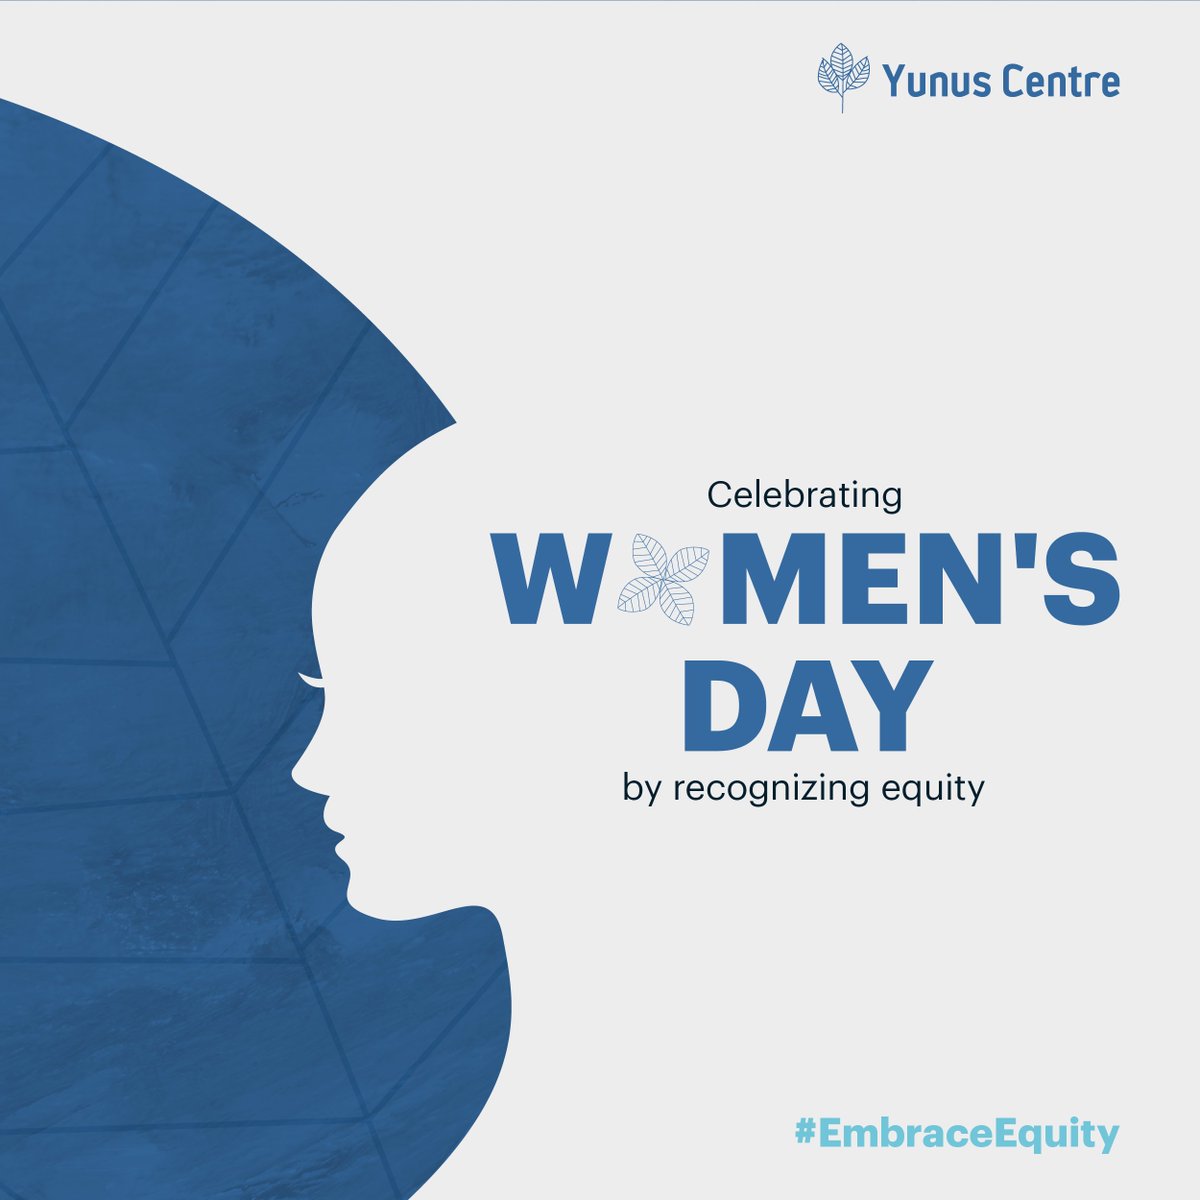 On this International Women's Day, let's honor the bravery and dedication of women worldwide. You are the powerhouse of great societies! Happy Women's Day! #InternationalWomensDay #EmbraceEquity #YunusCentre